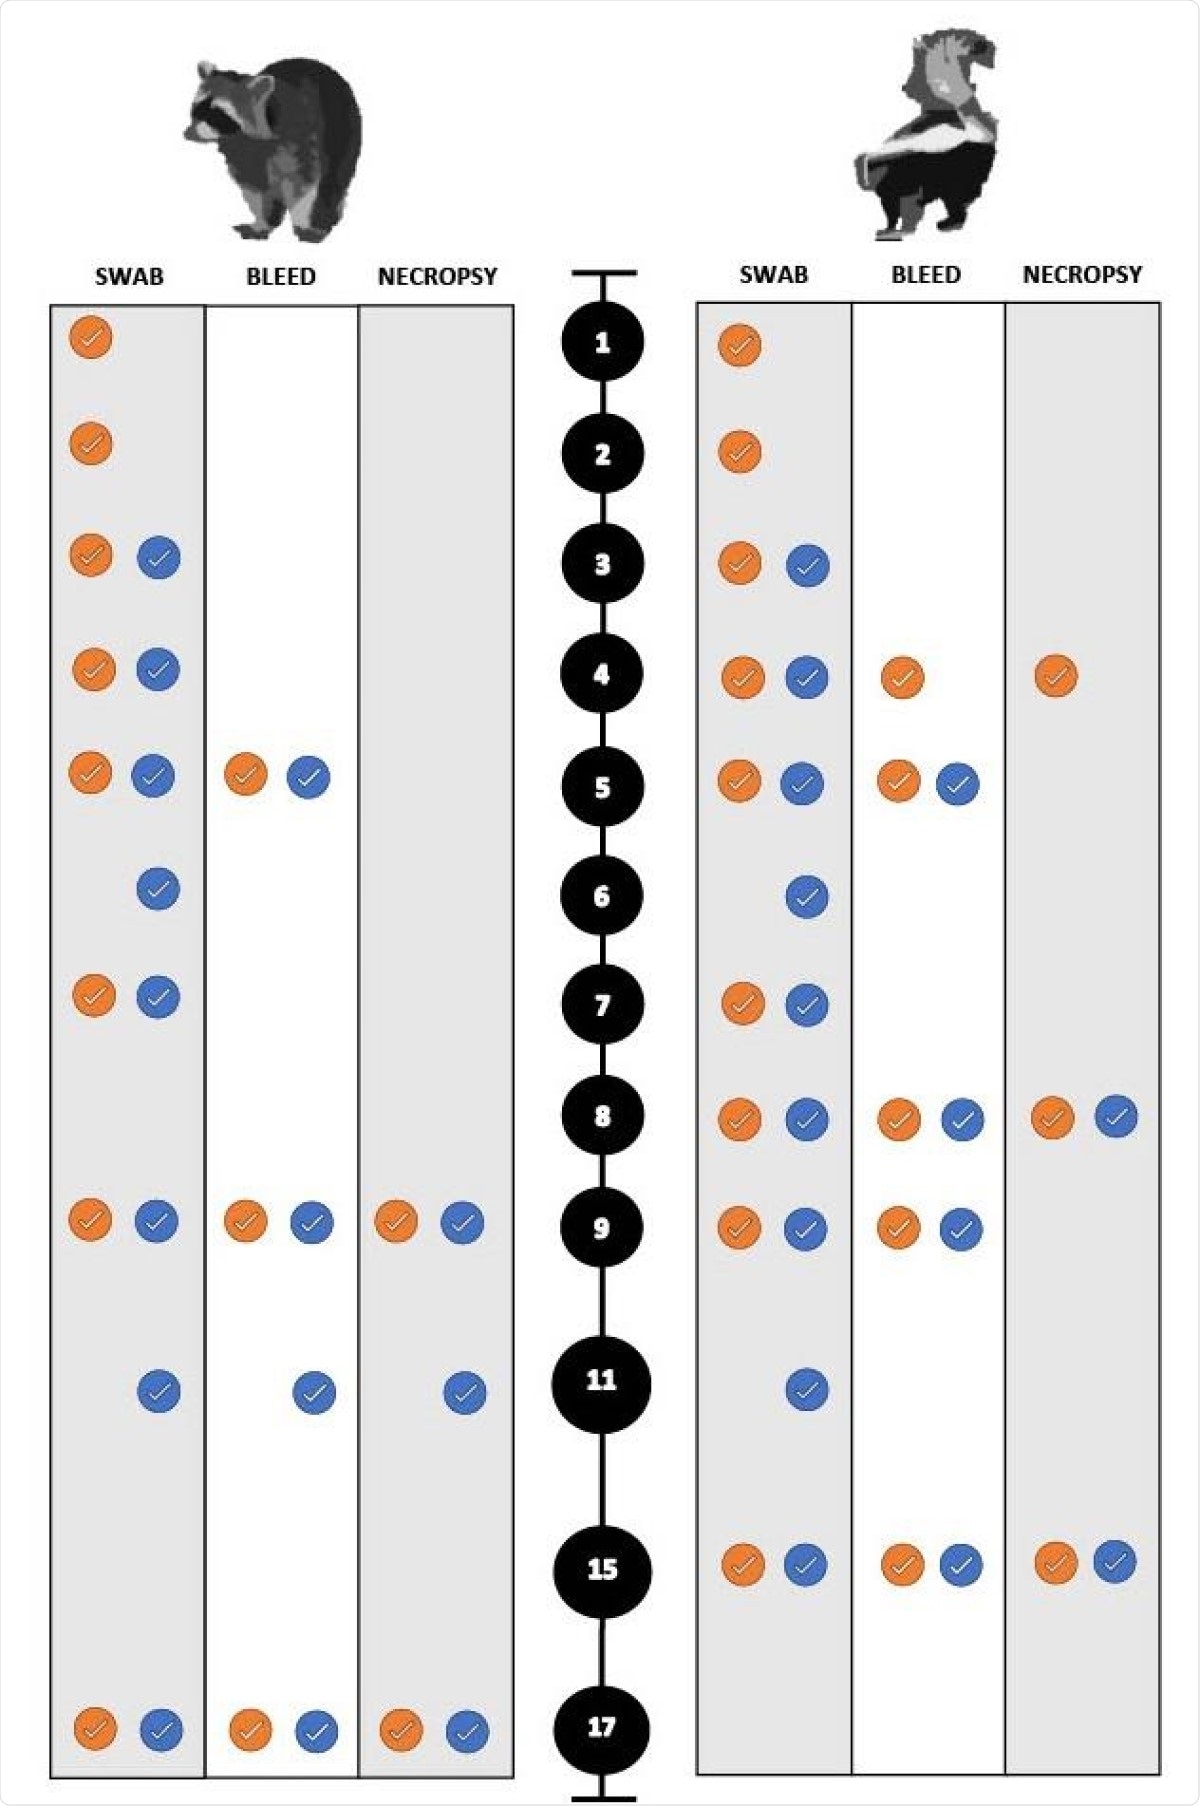 Timeline for the experimental SARS-CoV-2 infection trials of both raccoons and 188 striped skunks. The black circles represent days post inoculation (DPI). The orange circles 189 indicate directly inoculated animals. The blue circles indicate the direct contact animals.